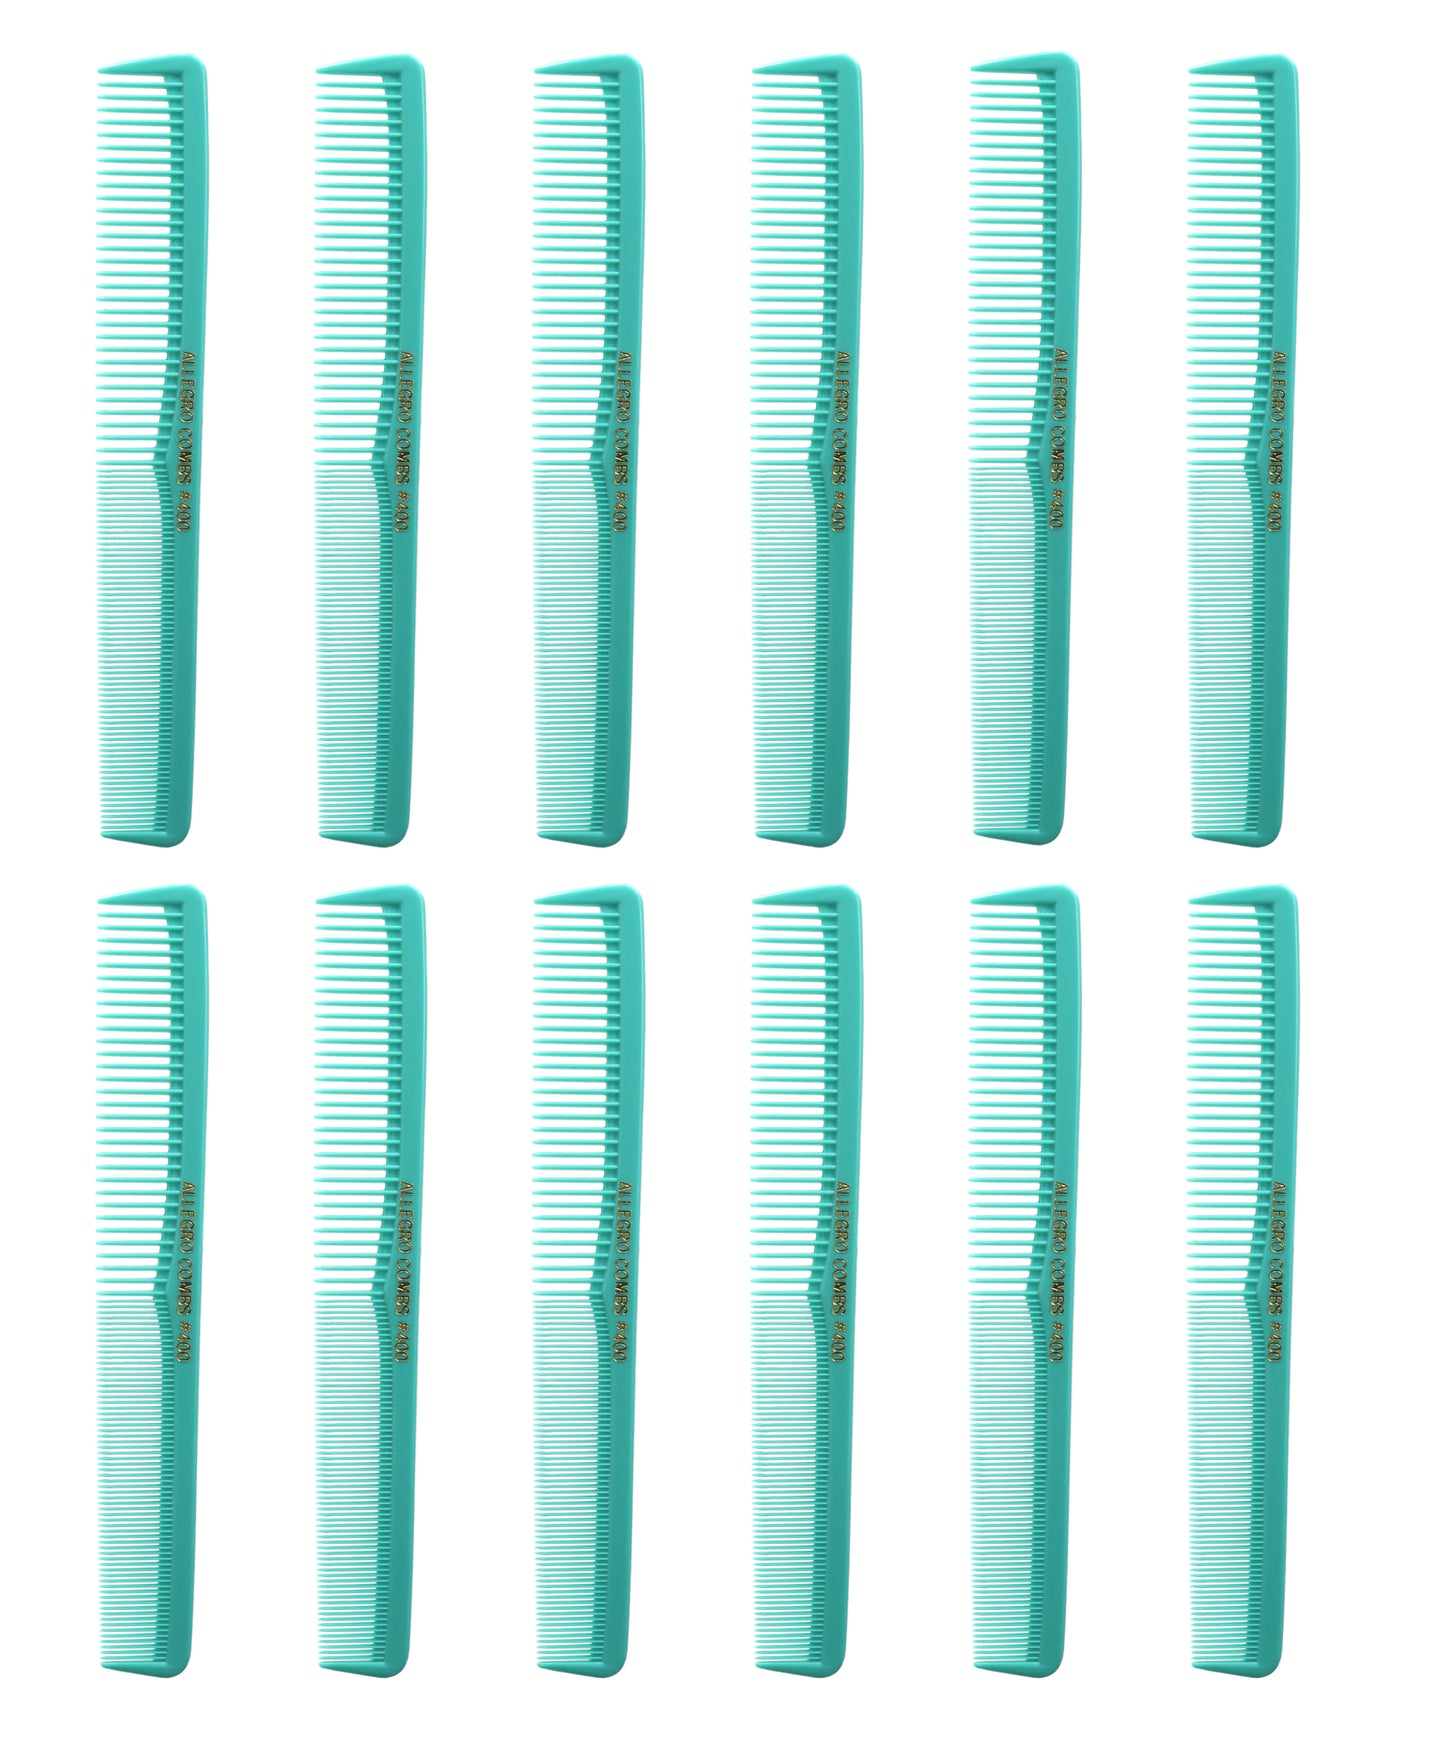 Allegro Combs 400 Barbers Combs Cutting Combs All Purpose Combs. Fresh Mint Combs. 12 Pack